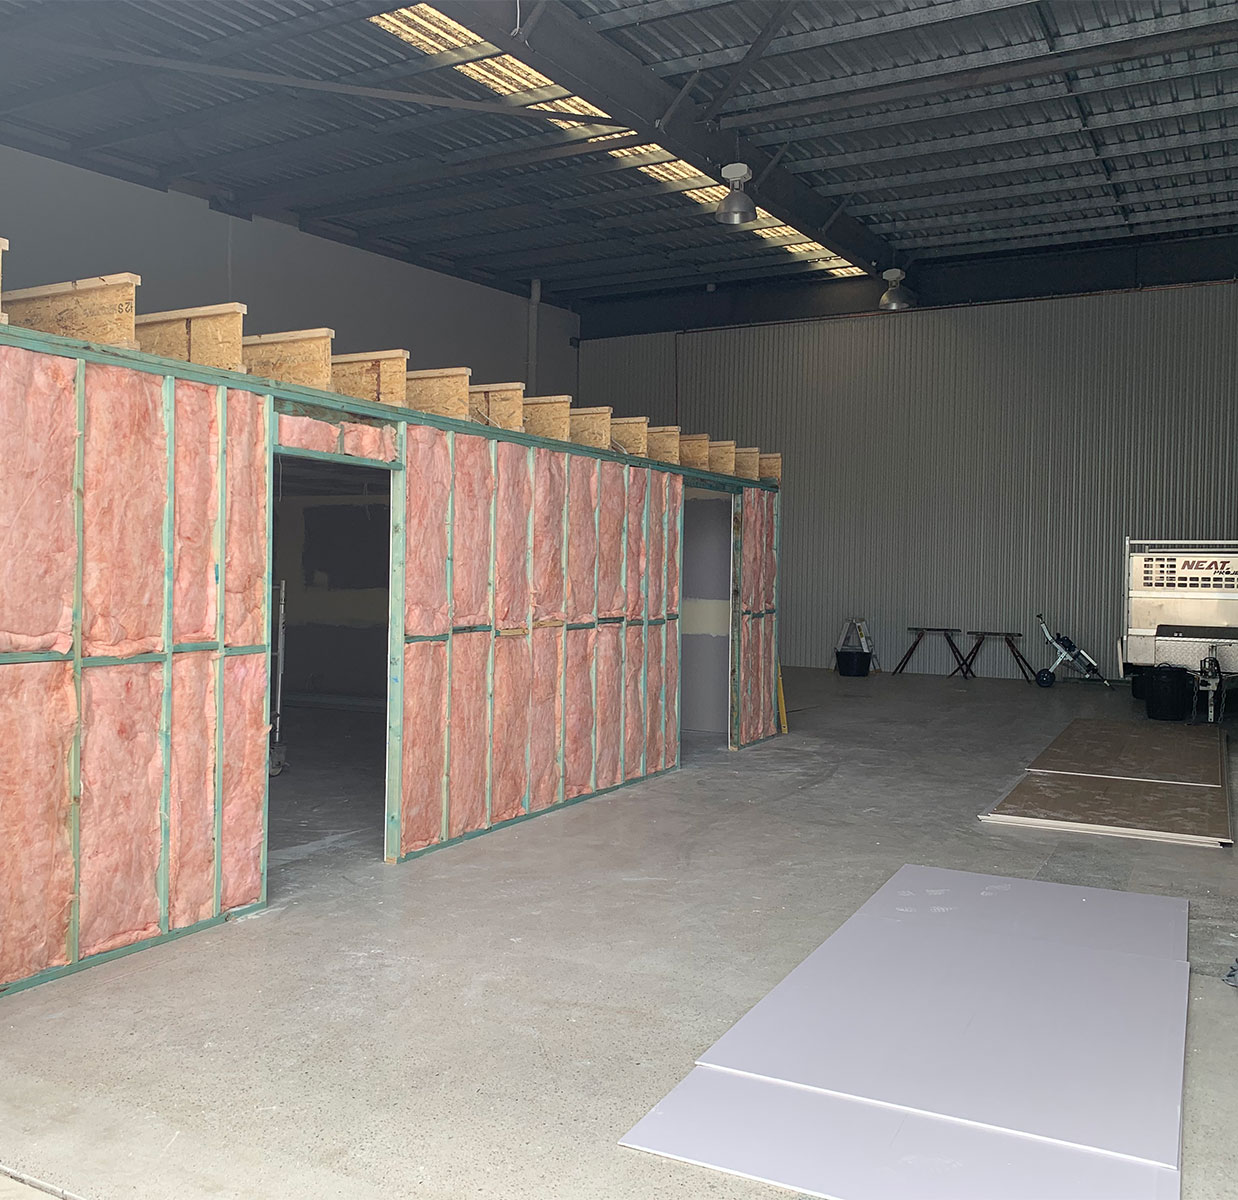 Room being built in warehouse